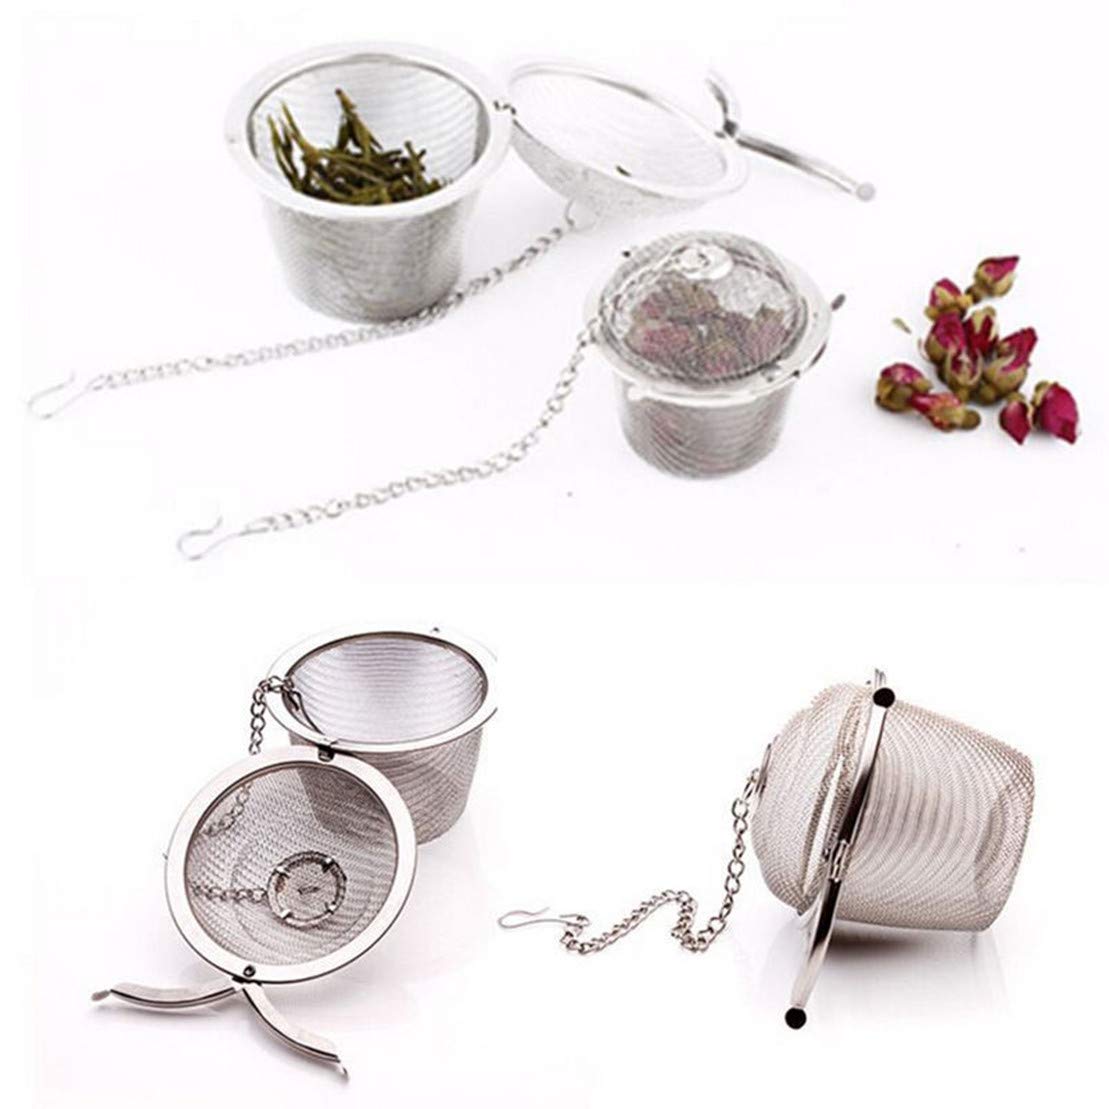 4 Size Stainless Steel Tea Strainer Infuser Tea ball Locking Ball Tea Spice Mesh Herbal Ball Cooking tools With Chain